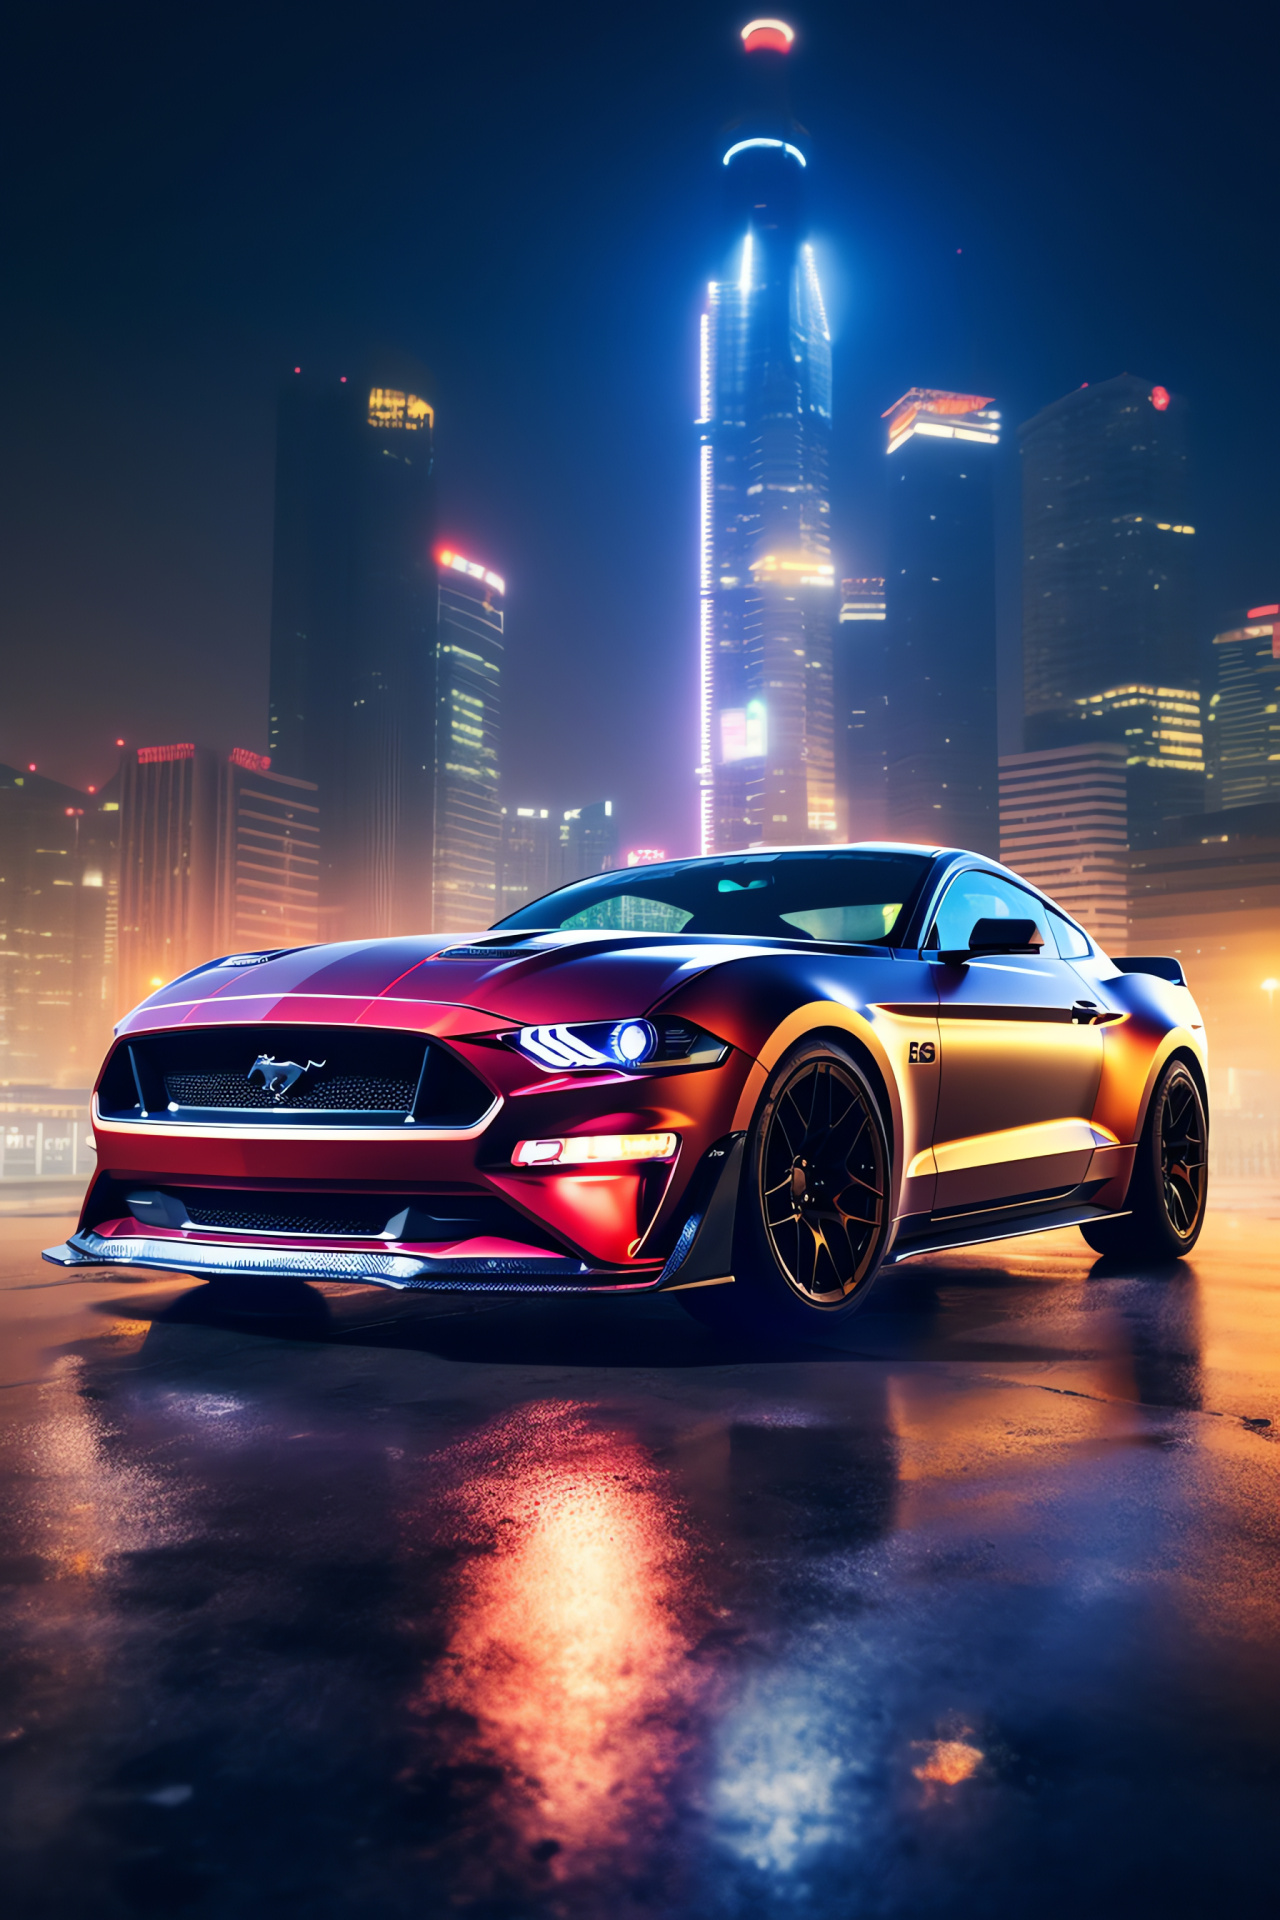 Mustang GT action, Illuminated Shanghai nightlife, GT drift prowess, Towering Pearl spectacle, Urban smoke trails, HD Phone Image